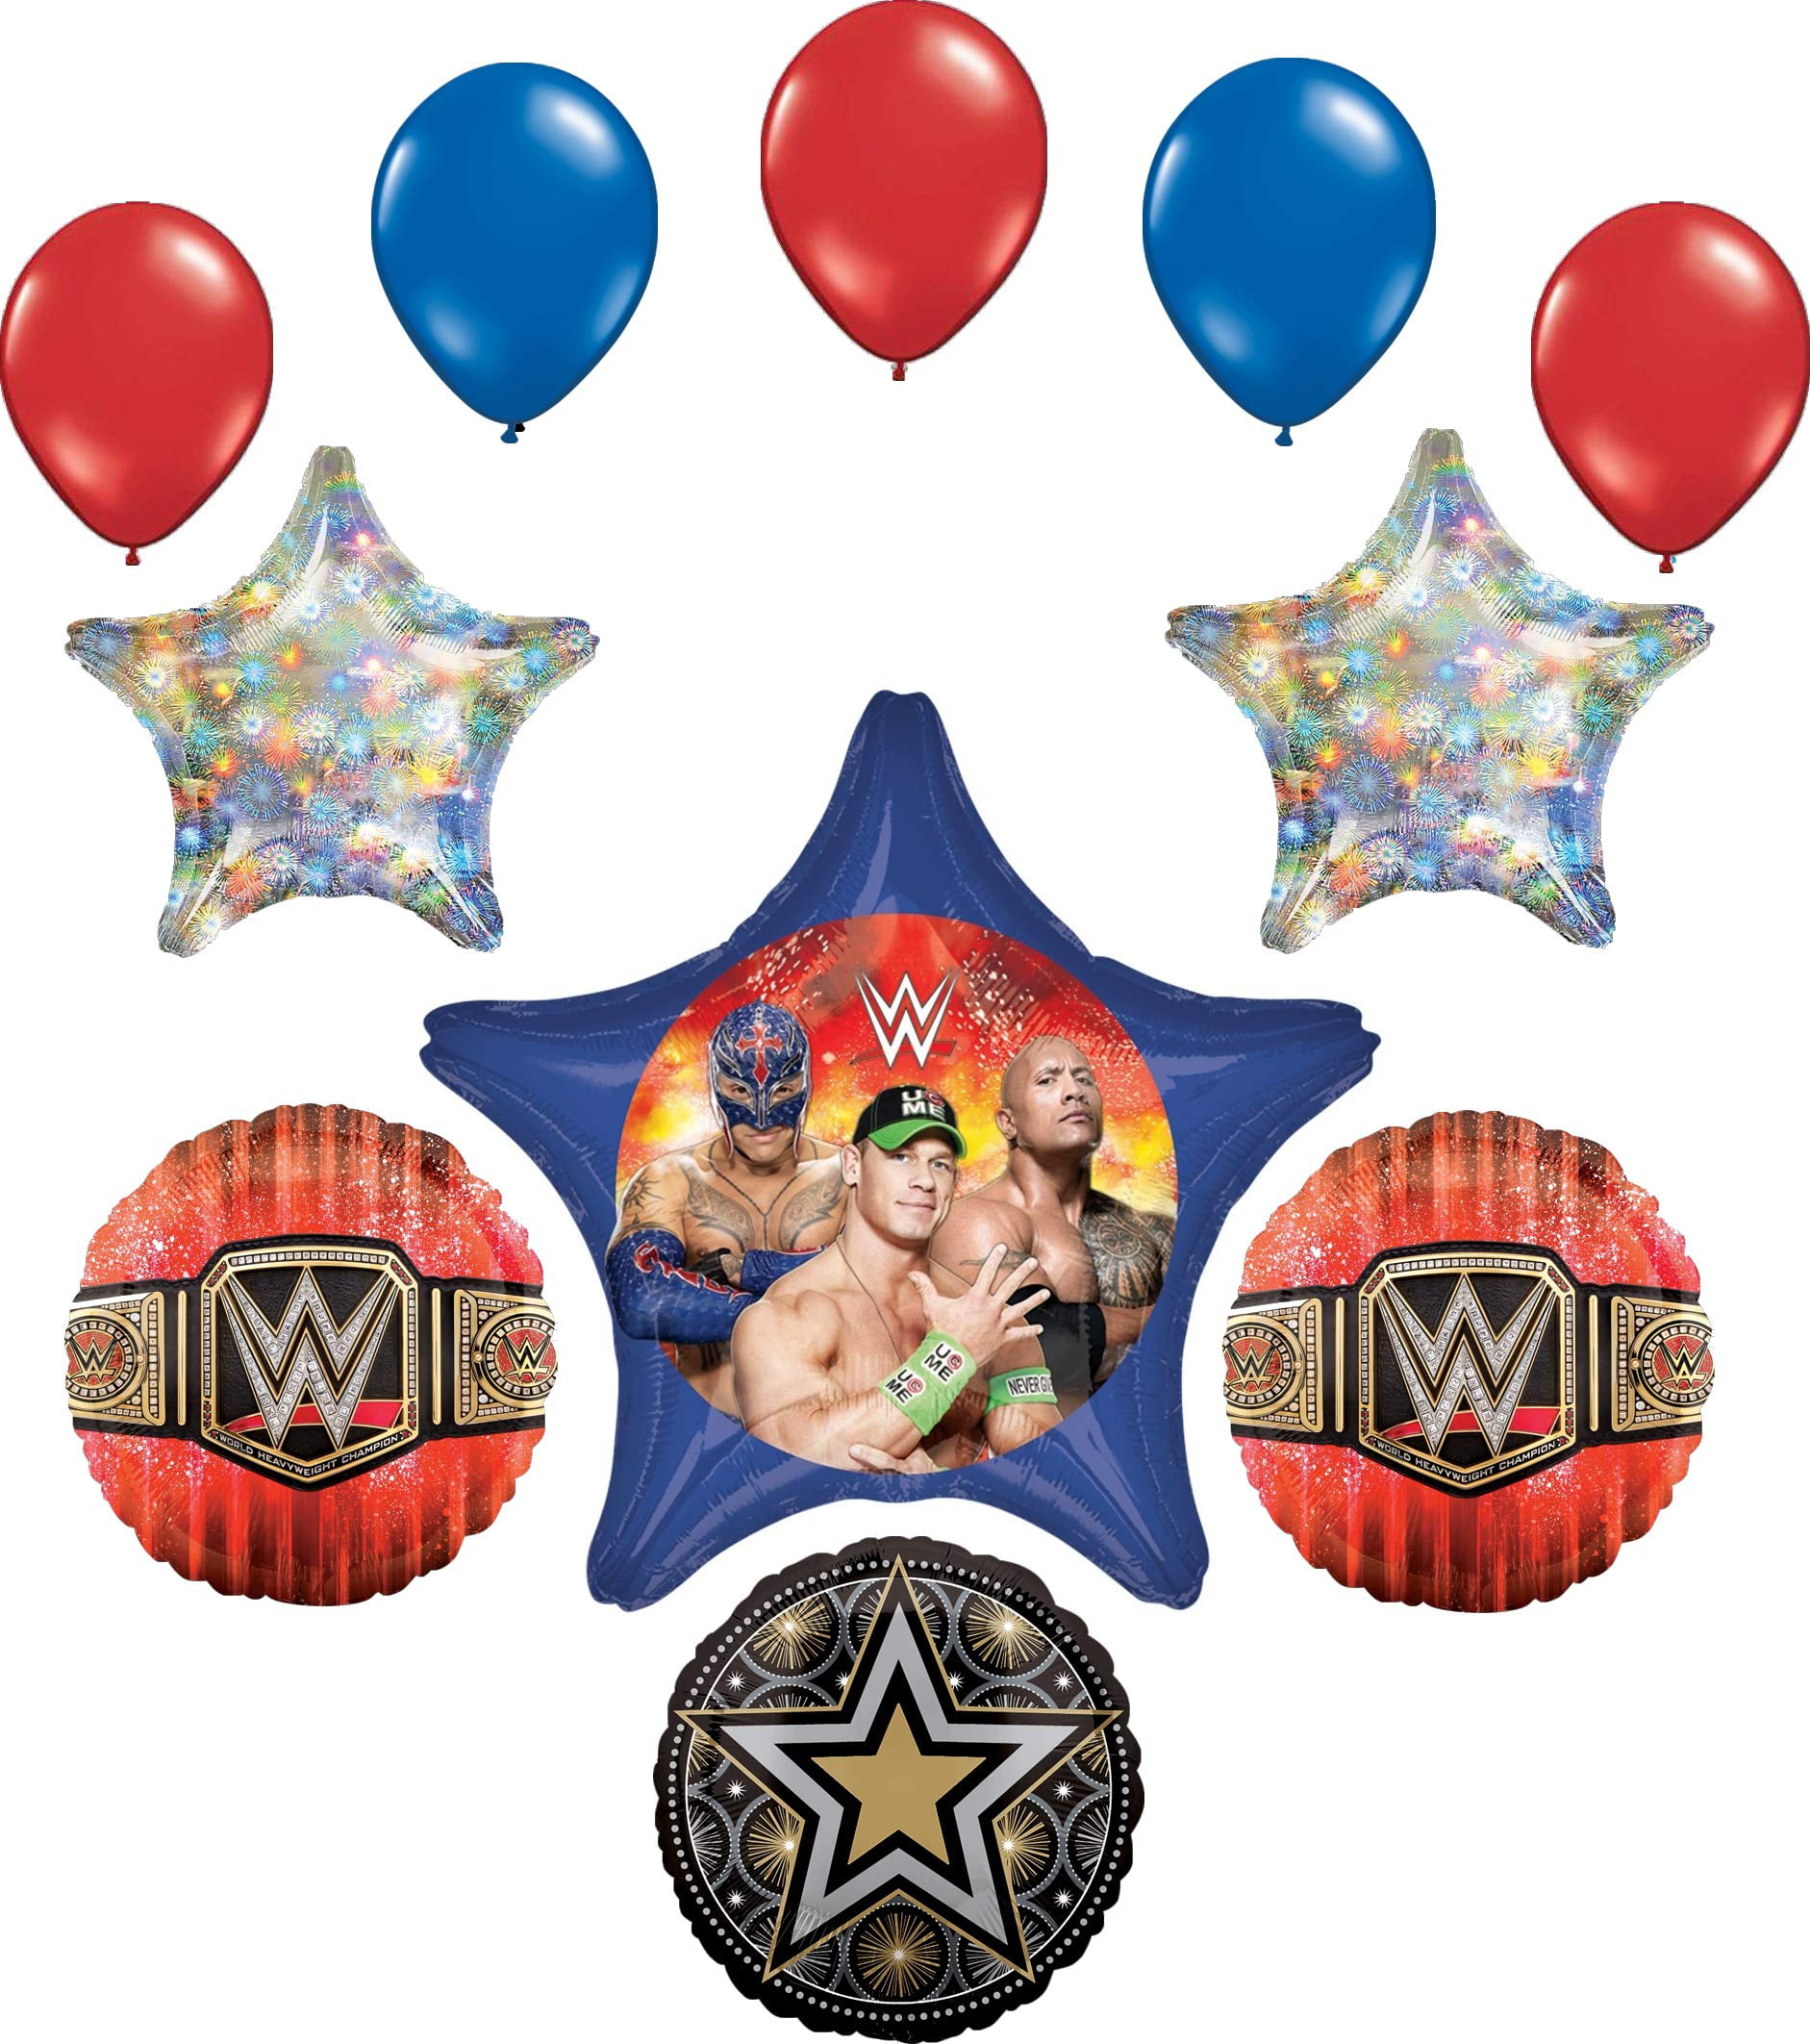 124 World Wrestling Entertainment Stickers WWE Stickers Party Favor Pack